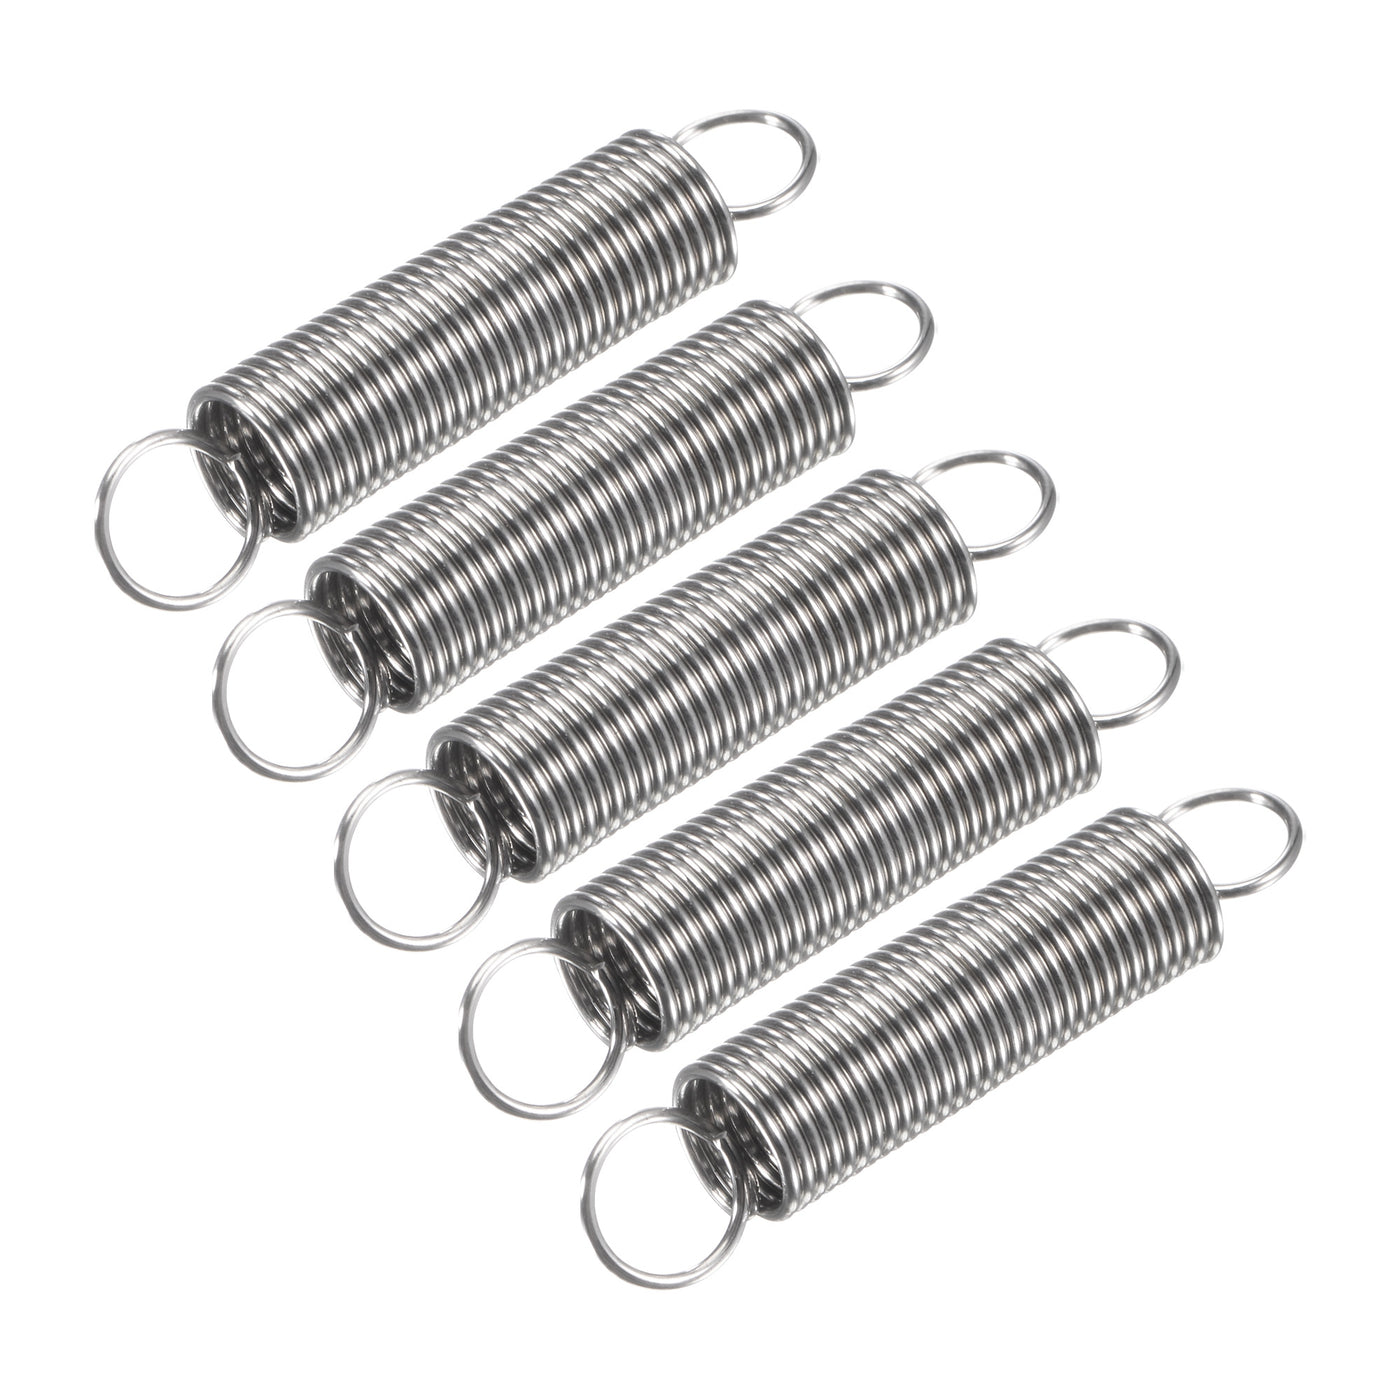 Uxcell Uxcell 0.8mmx8mmx70mm Extended Compression Spring,2.9Lbs Load Capacity,Silver,5pcs